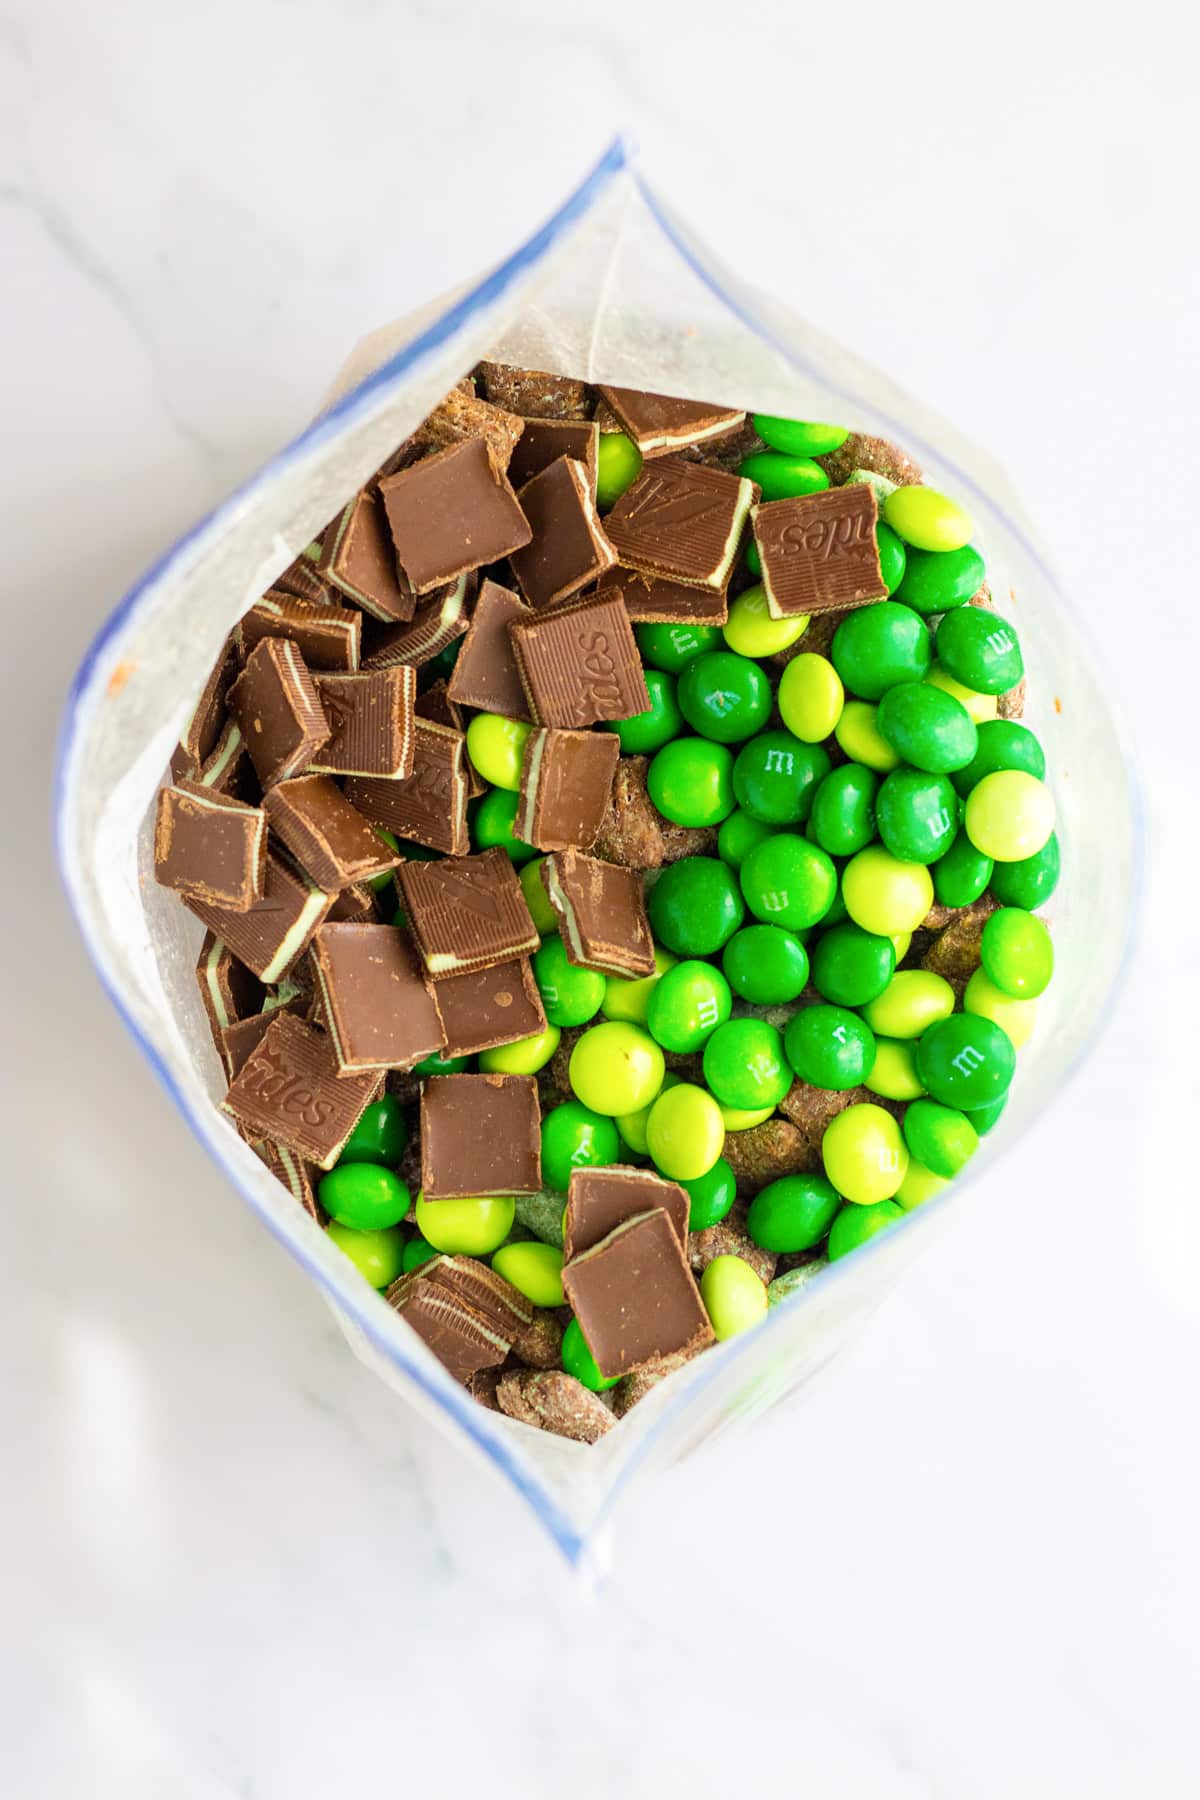 Andes mint pieces and mint M&Ms in a large zip top bag from above.